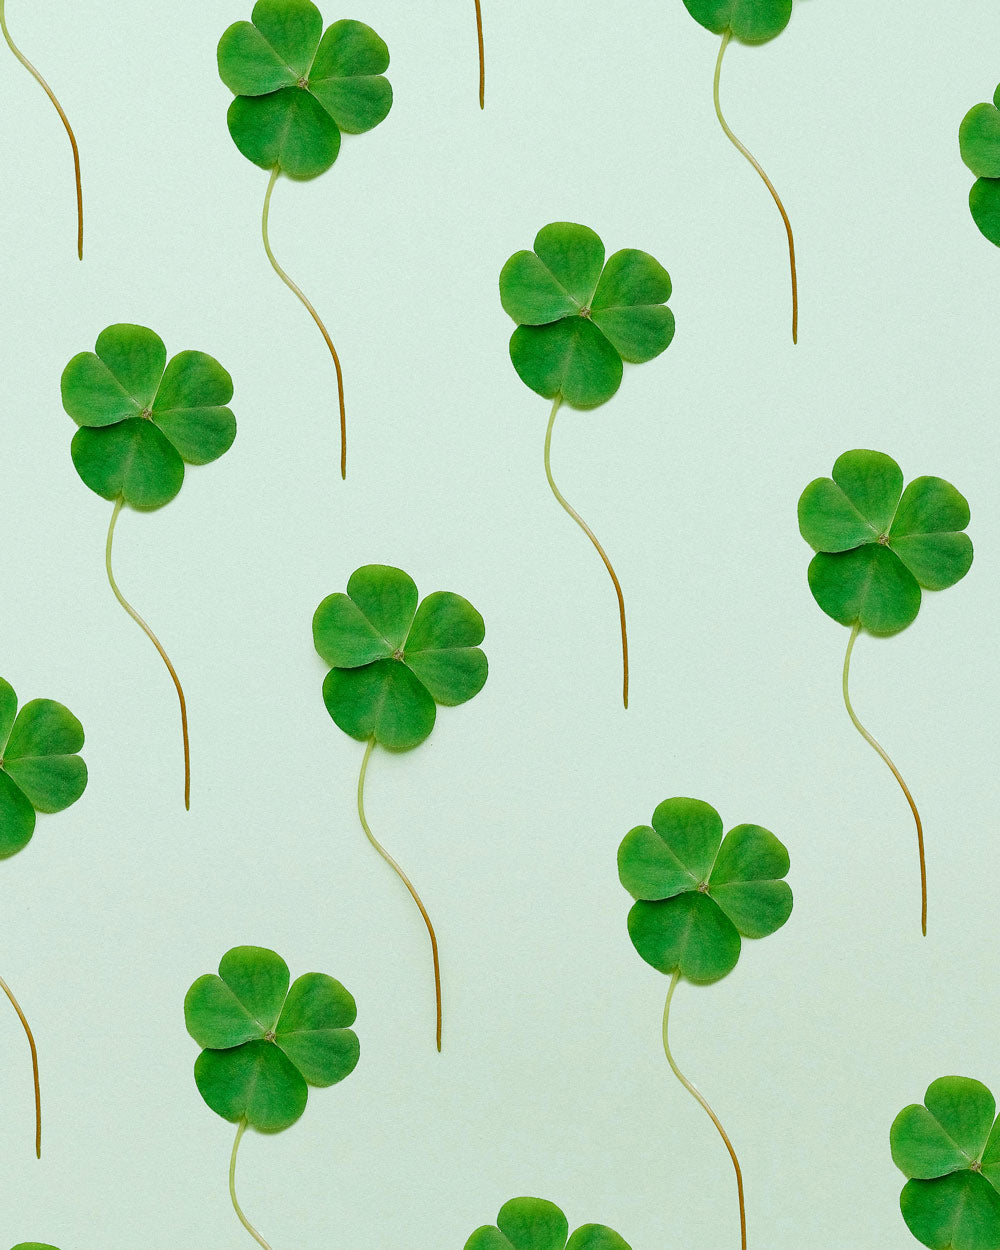 How to decorate St Patrick's Day with flowers